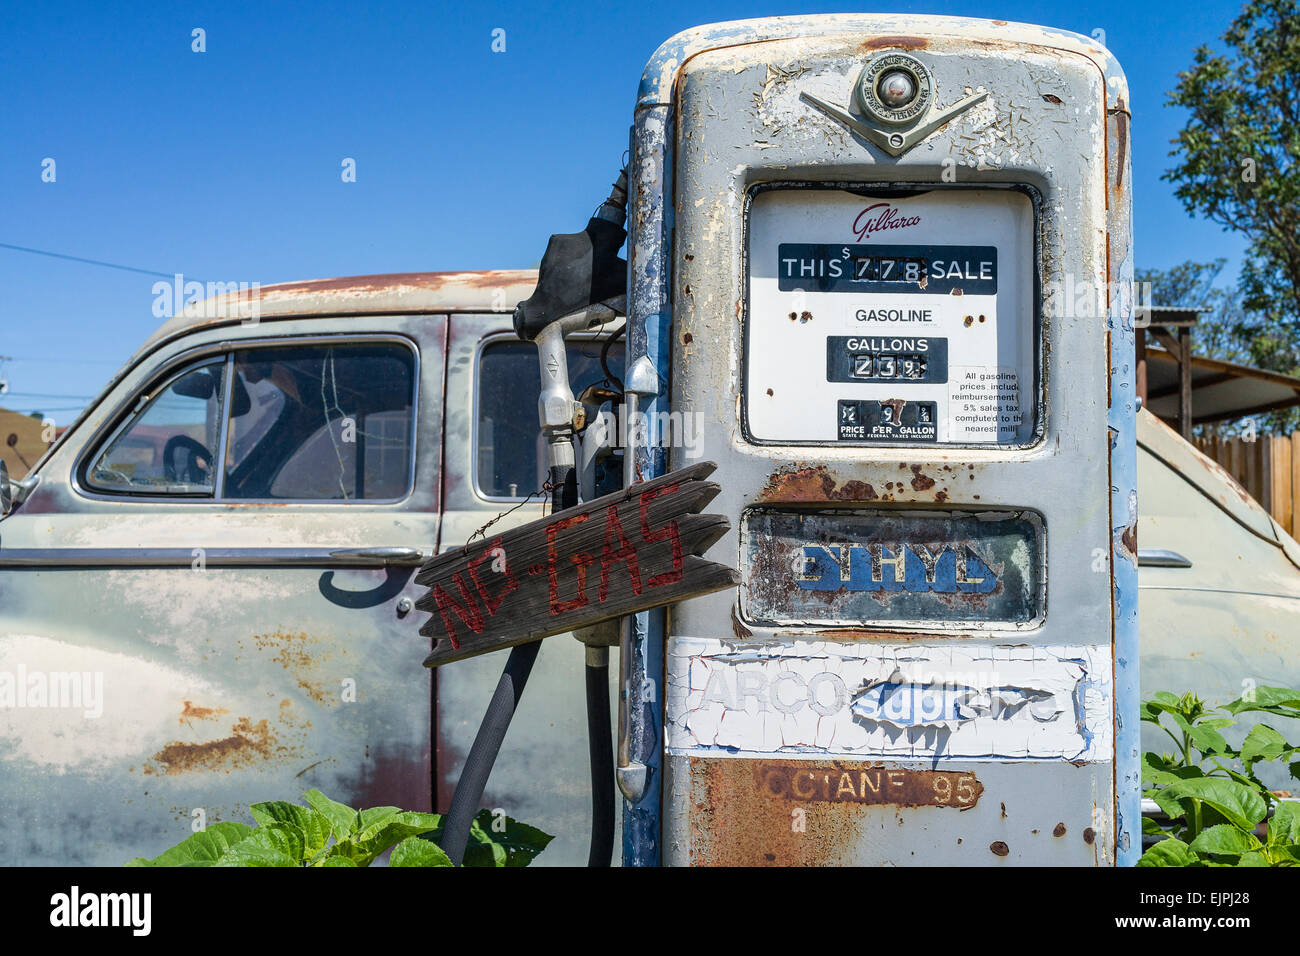 A 1947 Chrysler 4-door sedan rusting with faded paint sits parked in front of two old style gas pumps at a filling station. Stock Photo